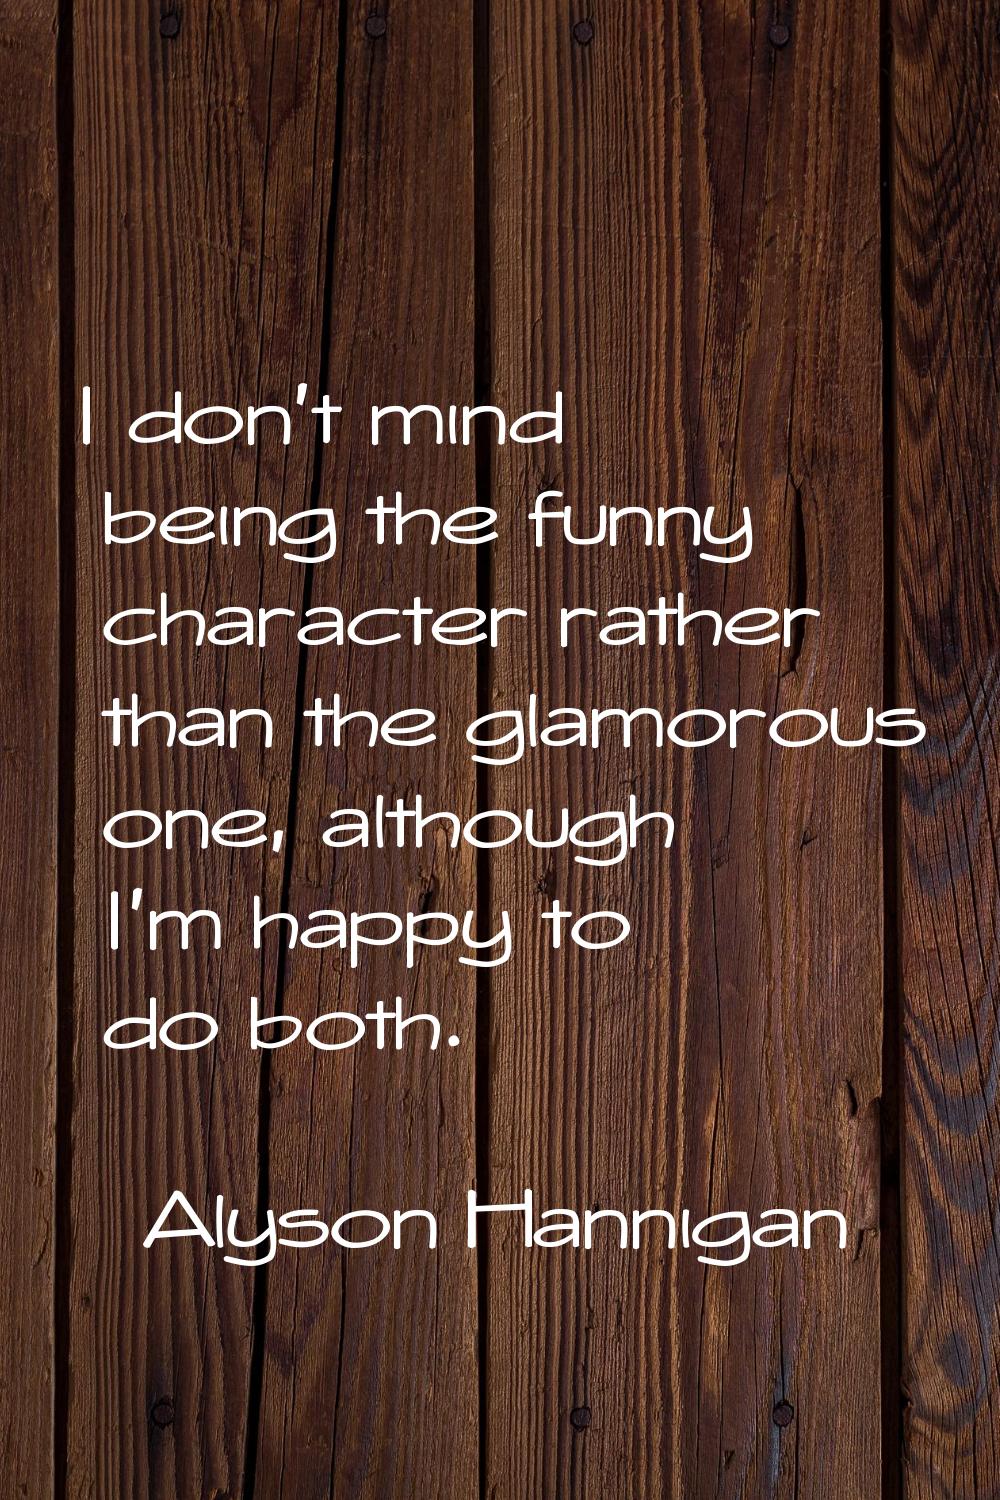 I don't mind being the funny character rather than the glamorous one, although I'm happy to do both